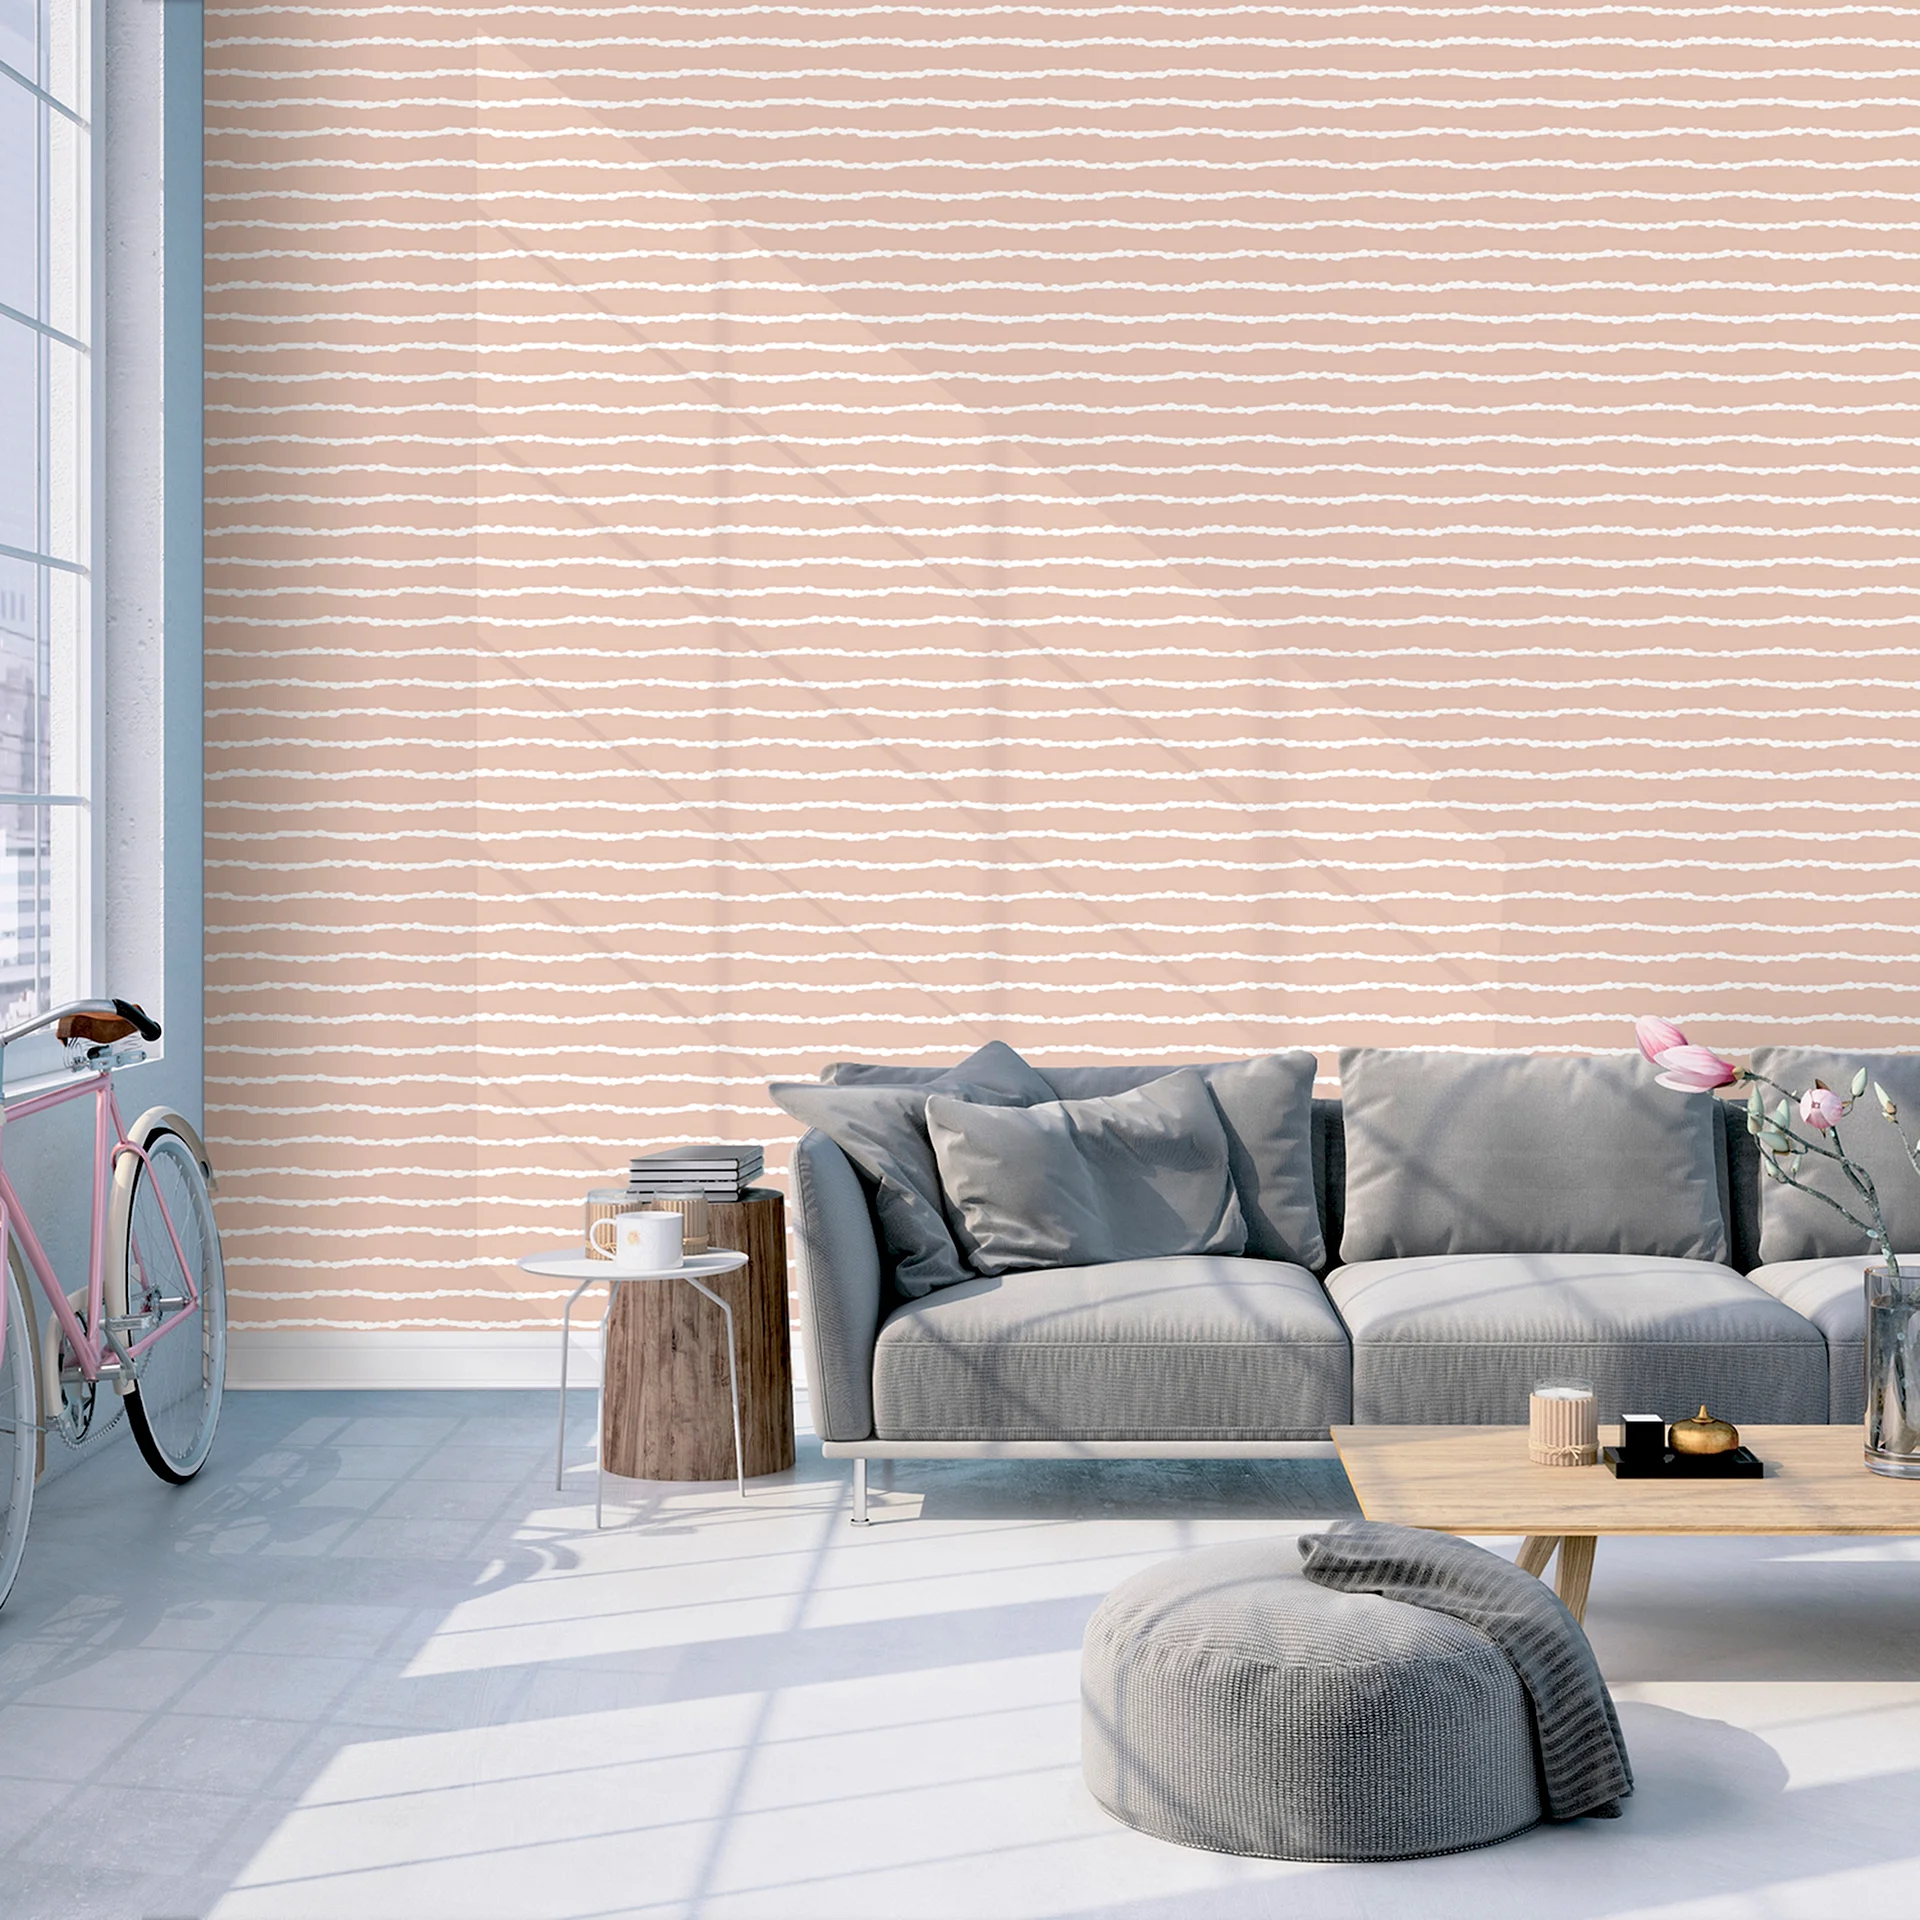 Striped pattern Room Wall images Wallpaper